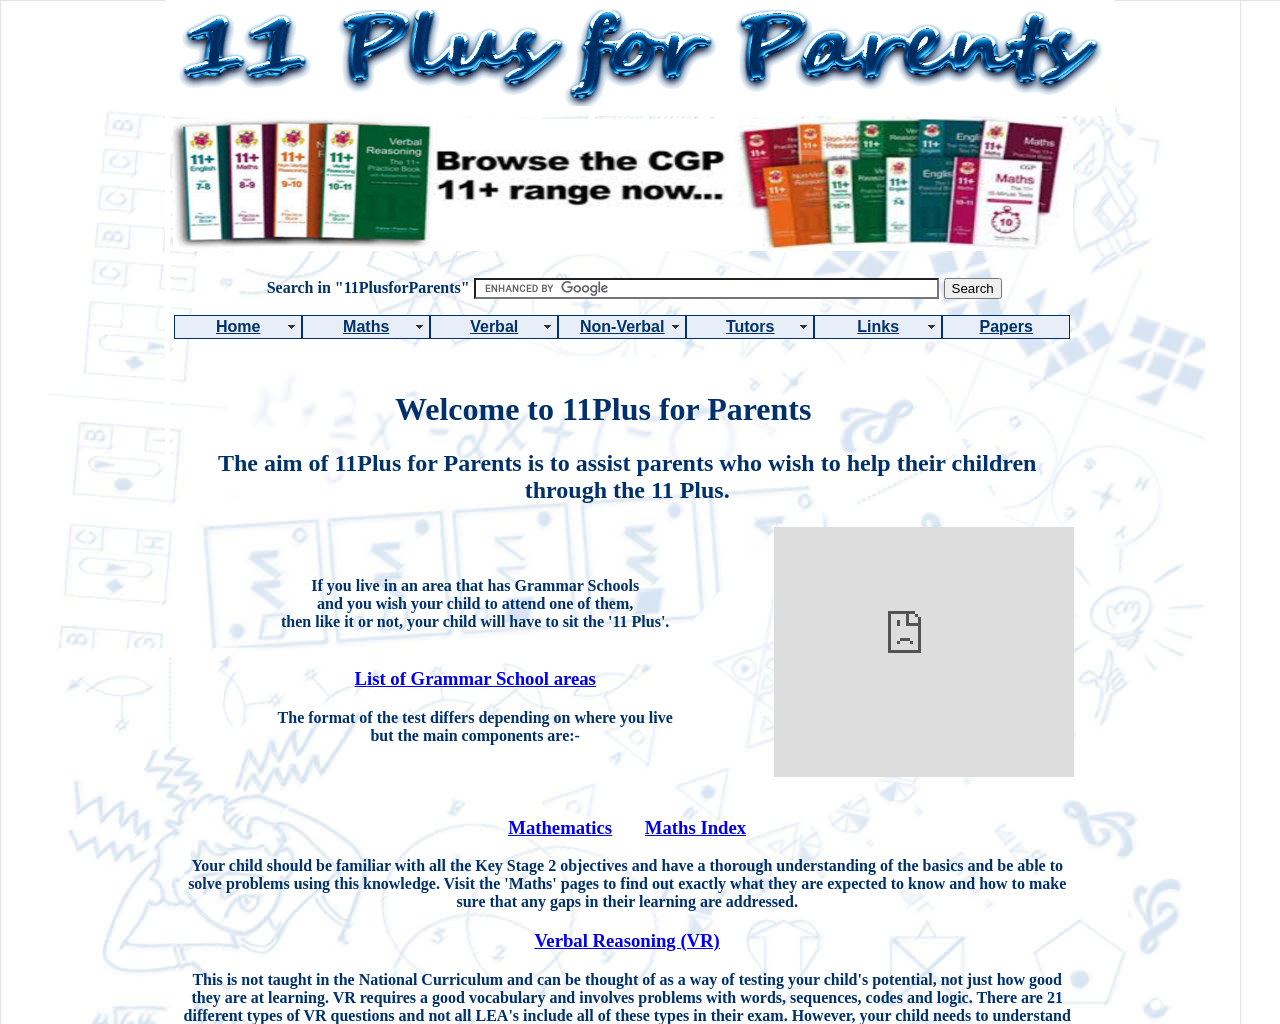 11plusforparents.co.uk